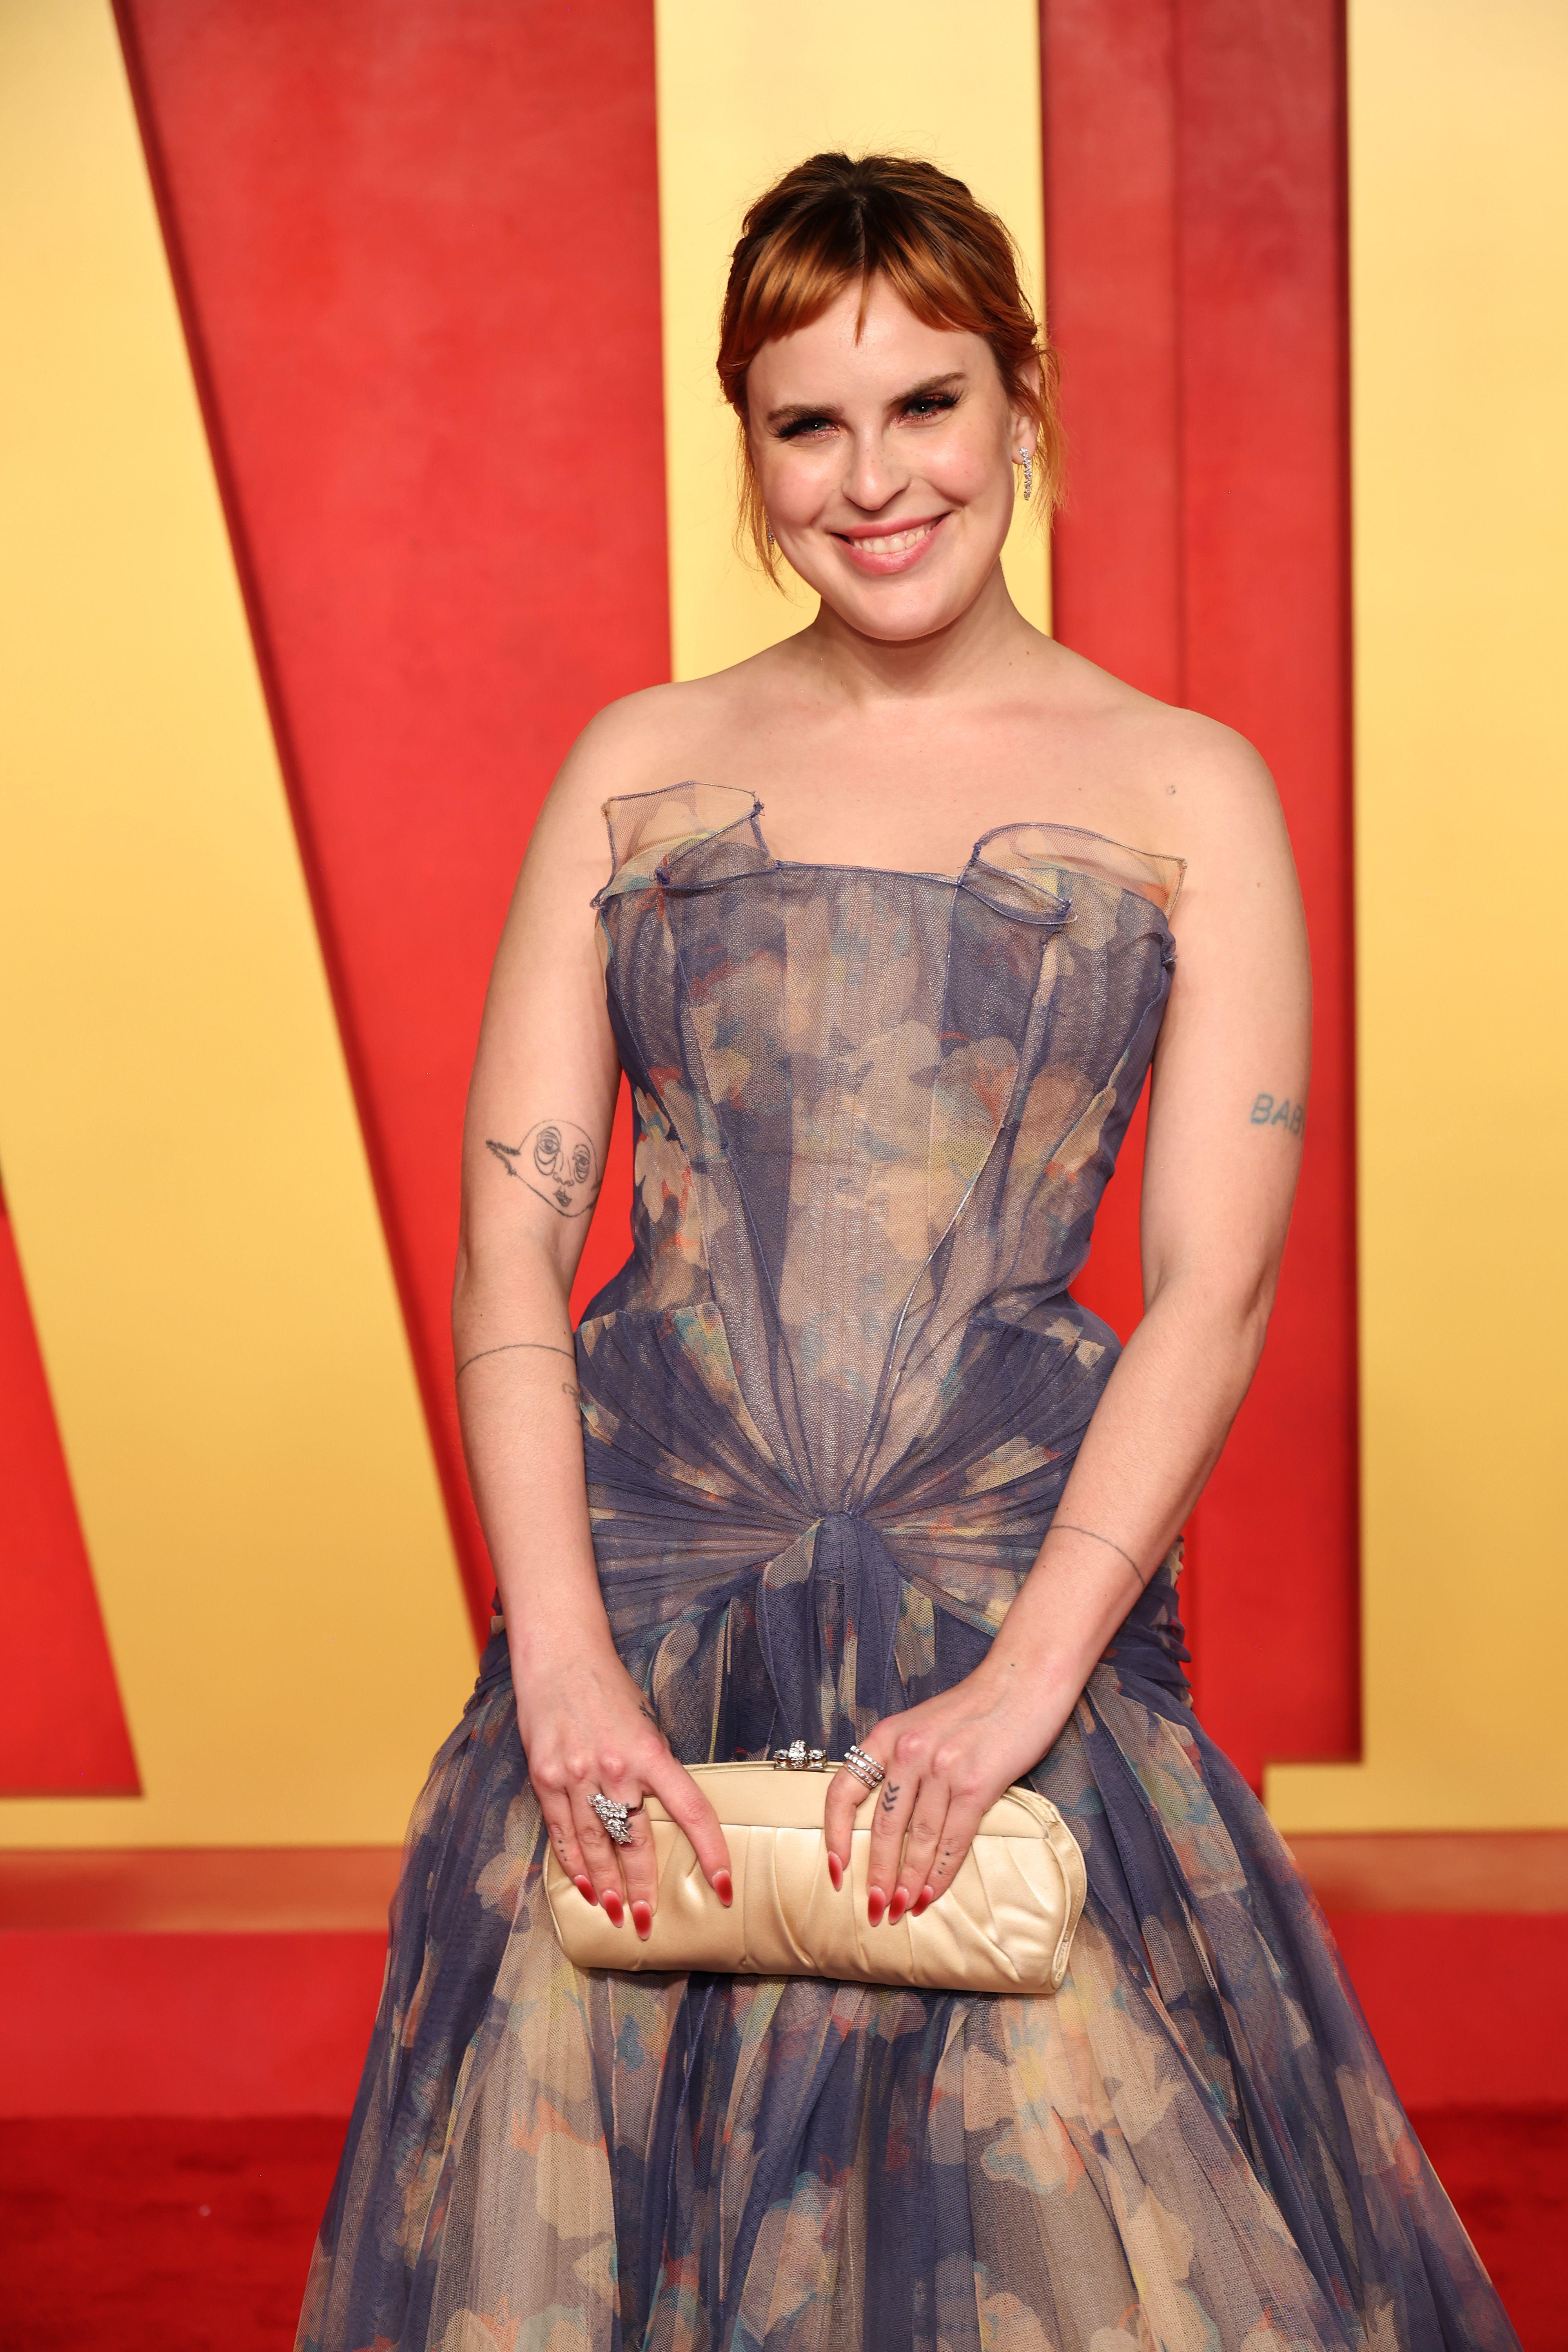 Tallulah smiling in a patterned gown with sheer overlay and bow detail, clutch in hand, standing on a red carpet